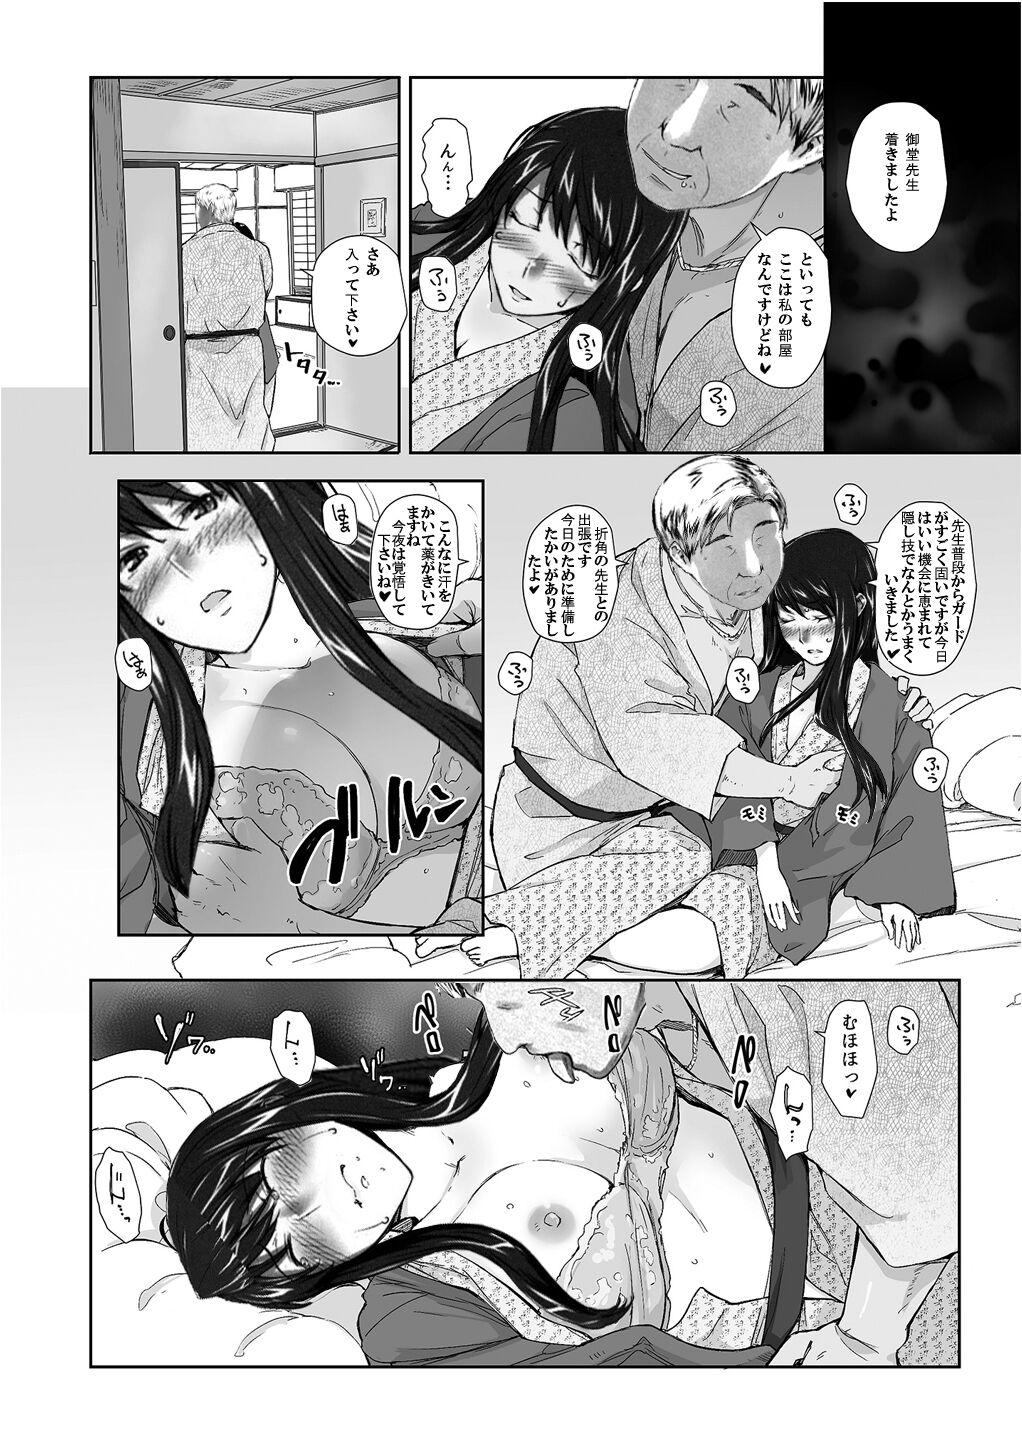 Gaygroupsex Sakiko-san in delusion Vol.8 revised ~Sakiko-san's circumstance at an educational training Route3~ (collage) (Continue to “First day of study trip” (page 42) of Vol.1) Gay Brownhair - Page 6